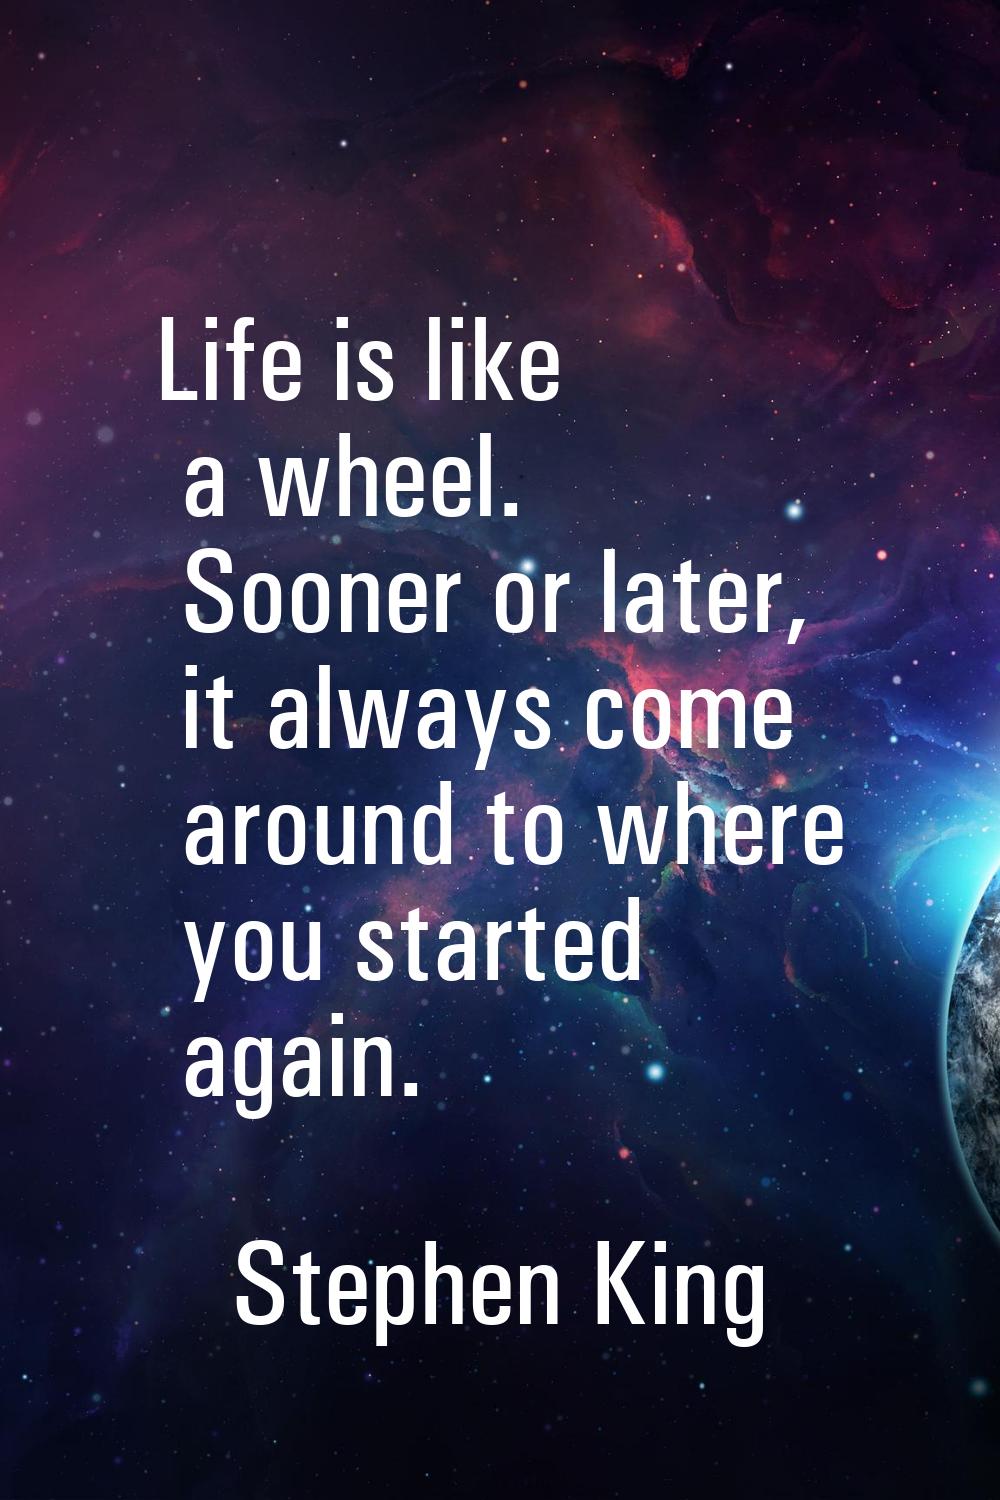 Life is like a wheel. Sooner or later, it always come around to where you started again.